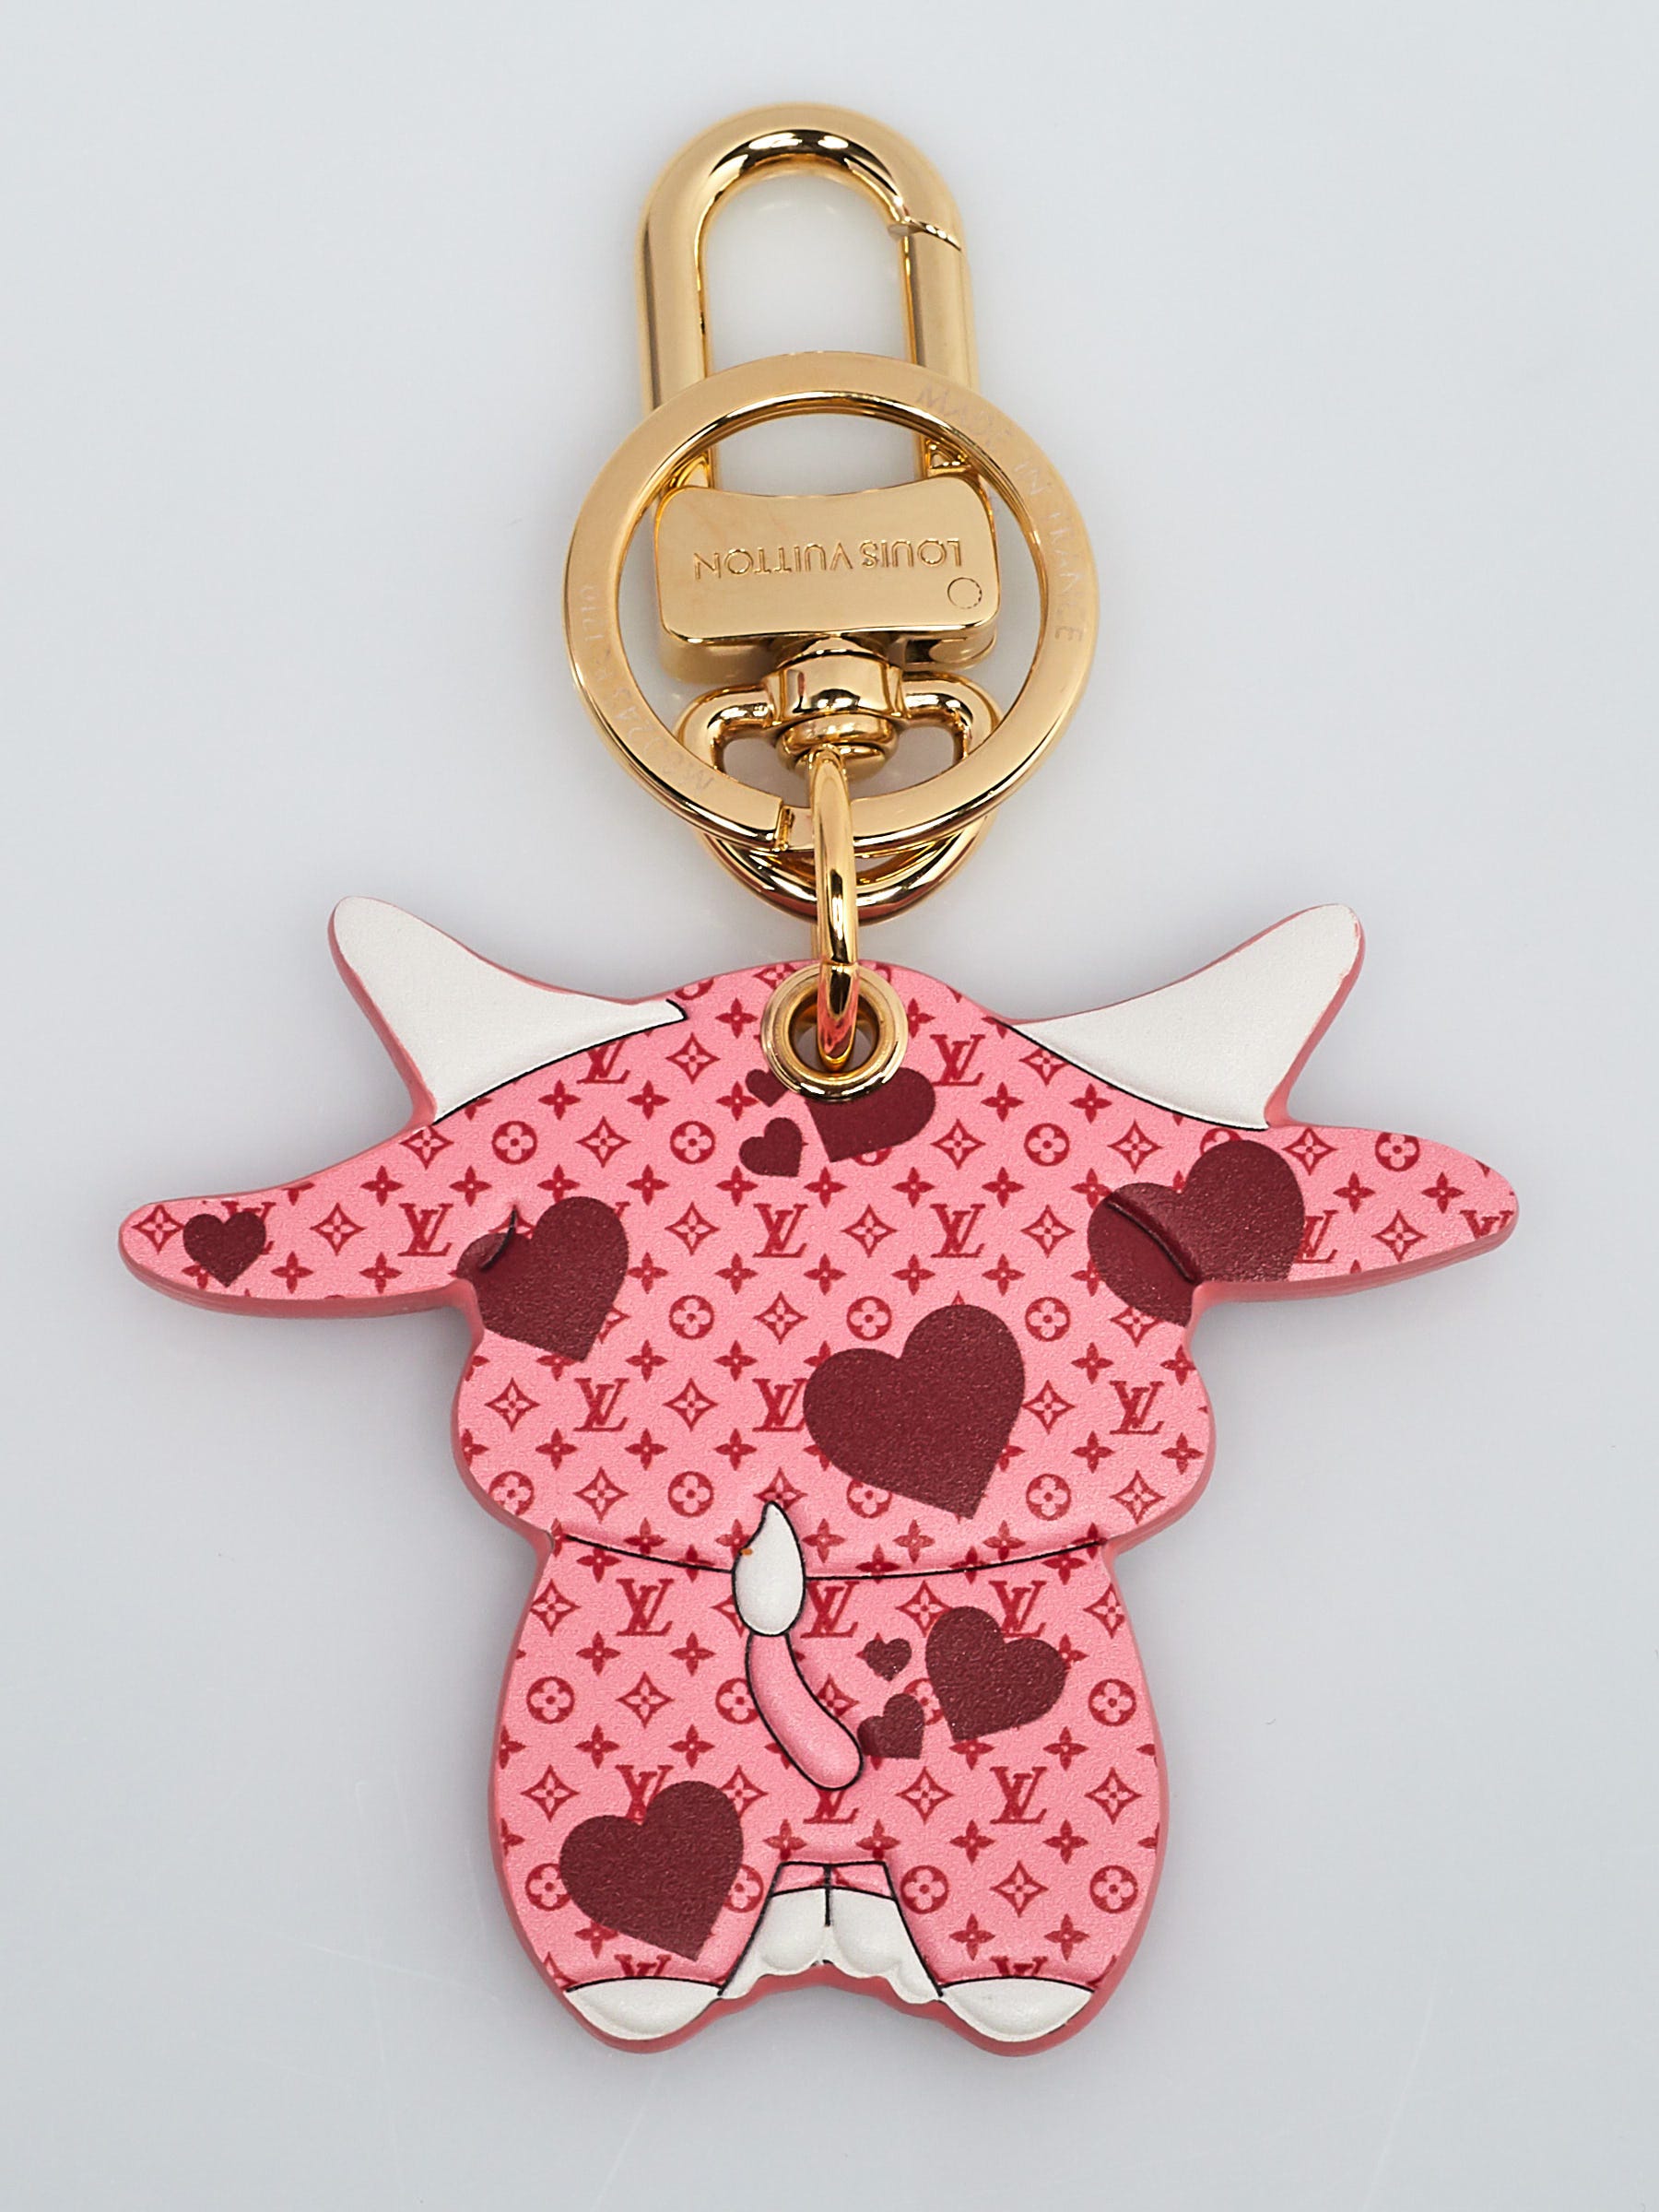 Louis Vuitton Lunar New Year Year of the Dog Keychain w/ Tags